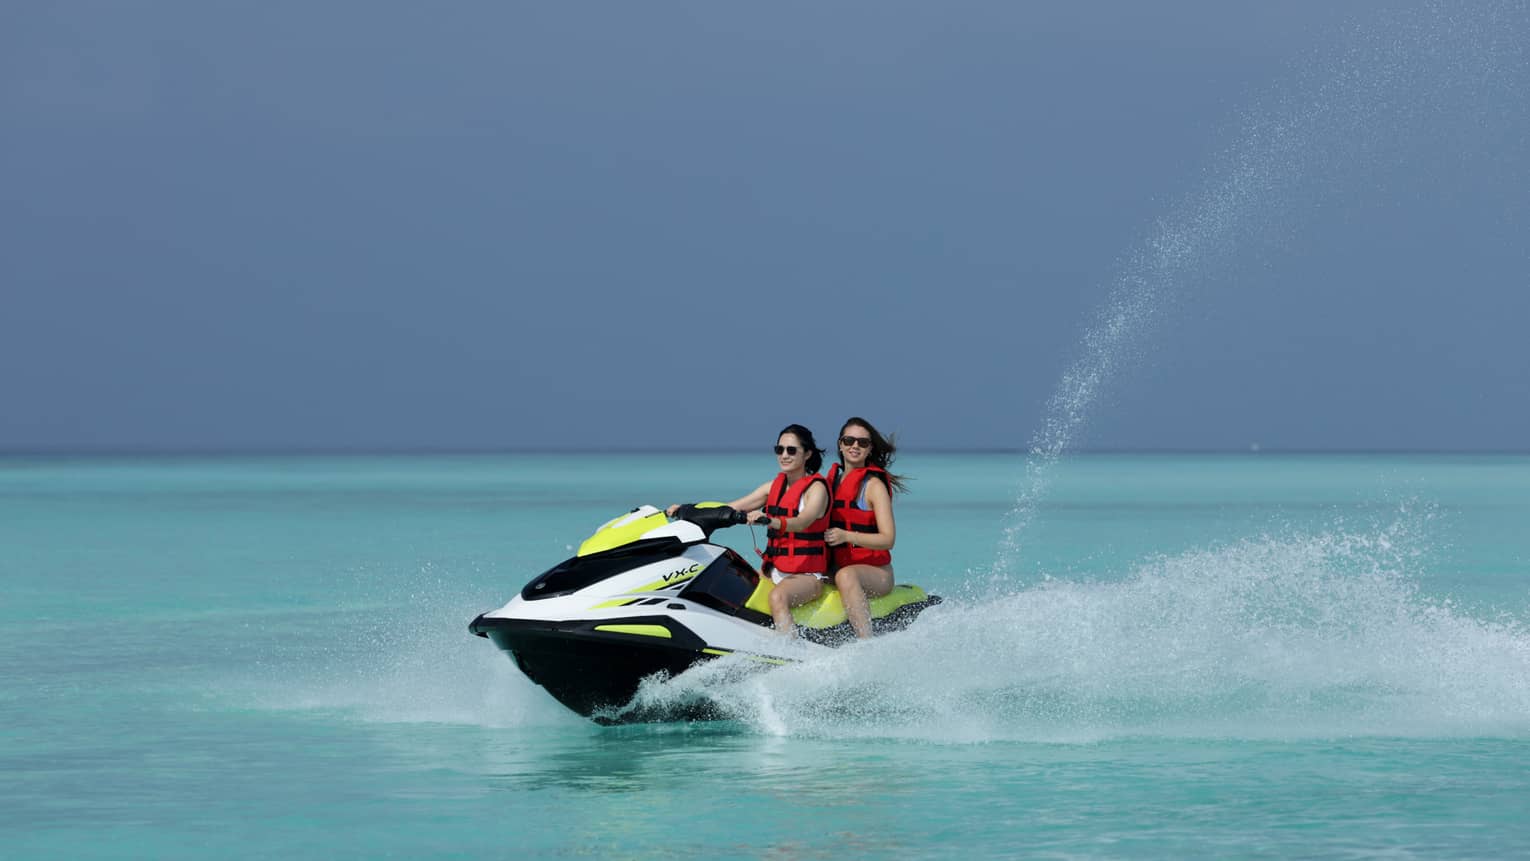 Wearing life jackets, two smiling jet-skiers ride through the clear ocean, water spurting up from beside and behind the boat.